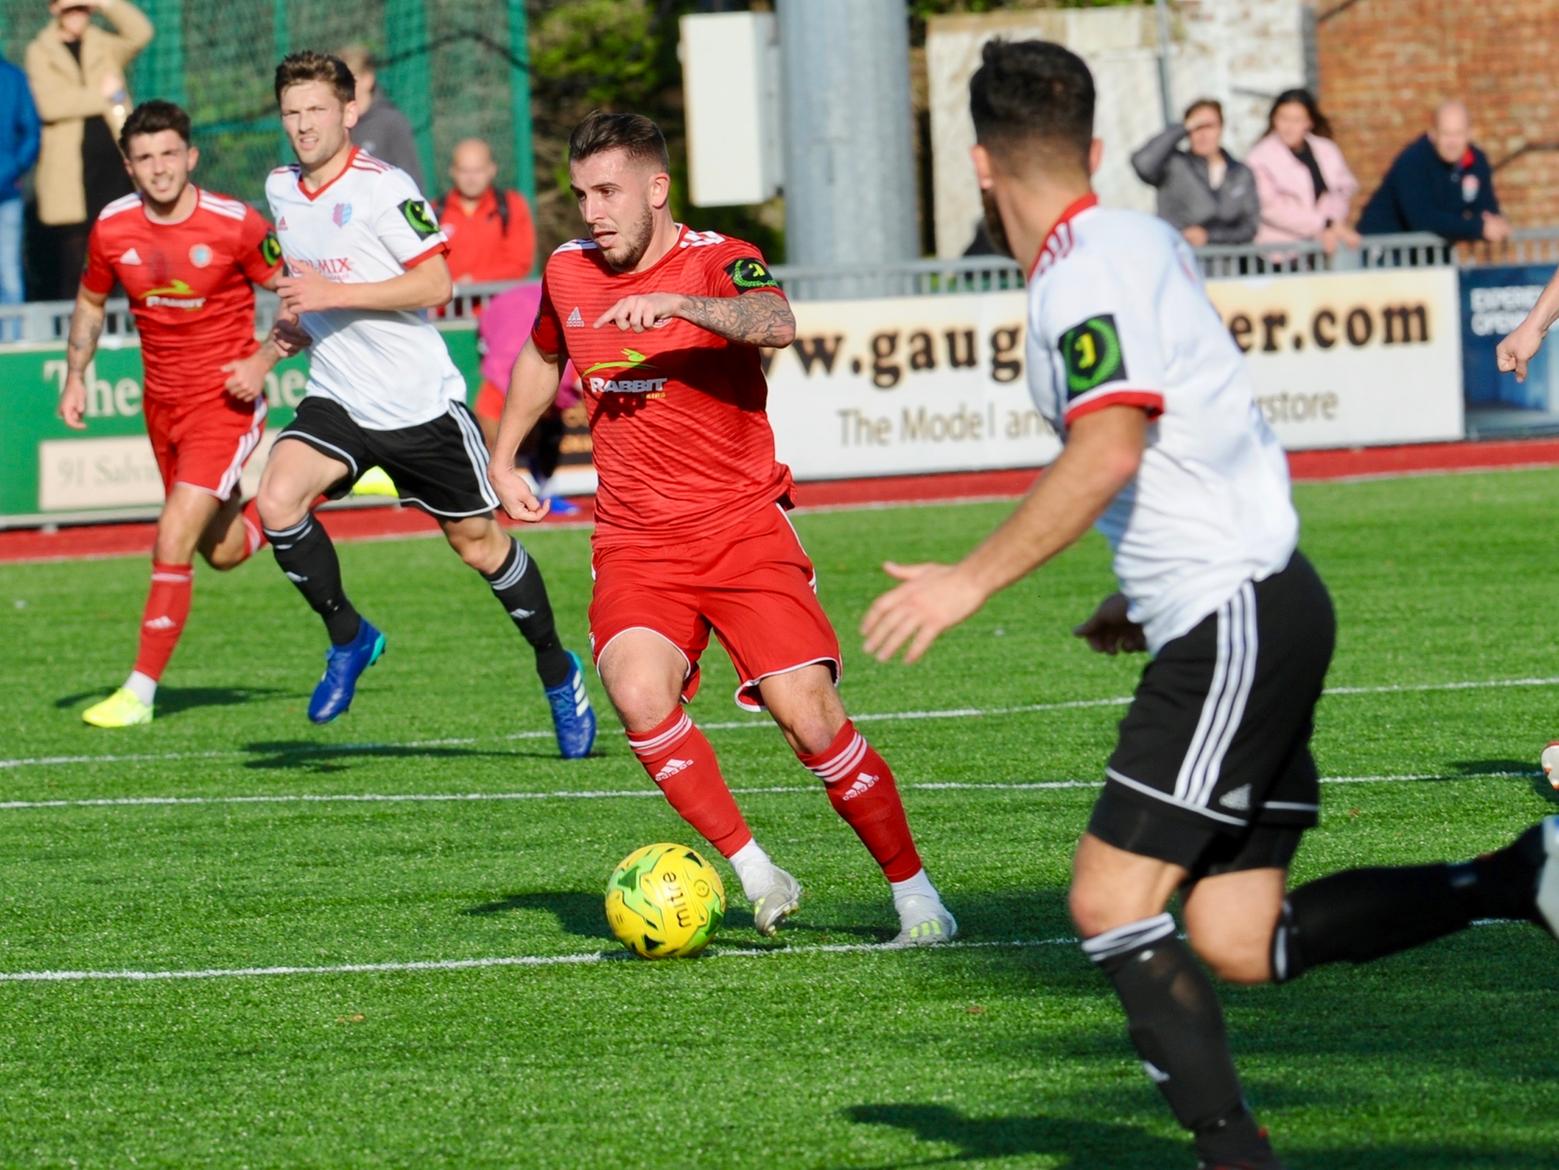 Action from Worthing v Brightlingsea